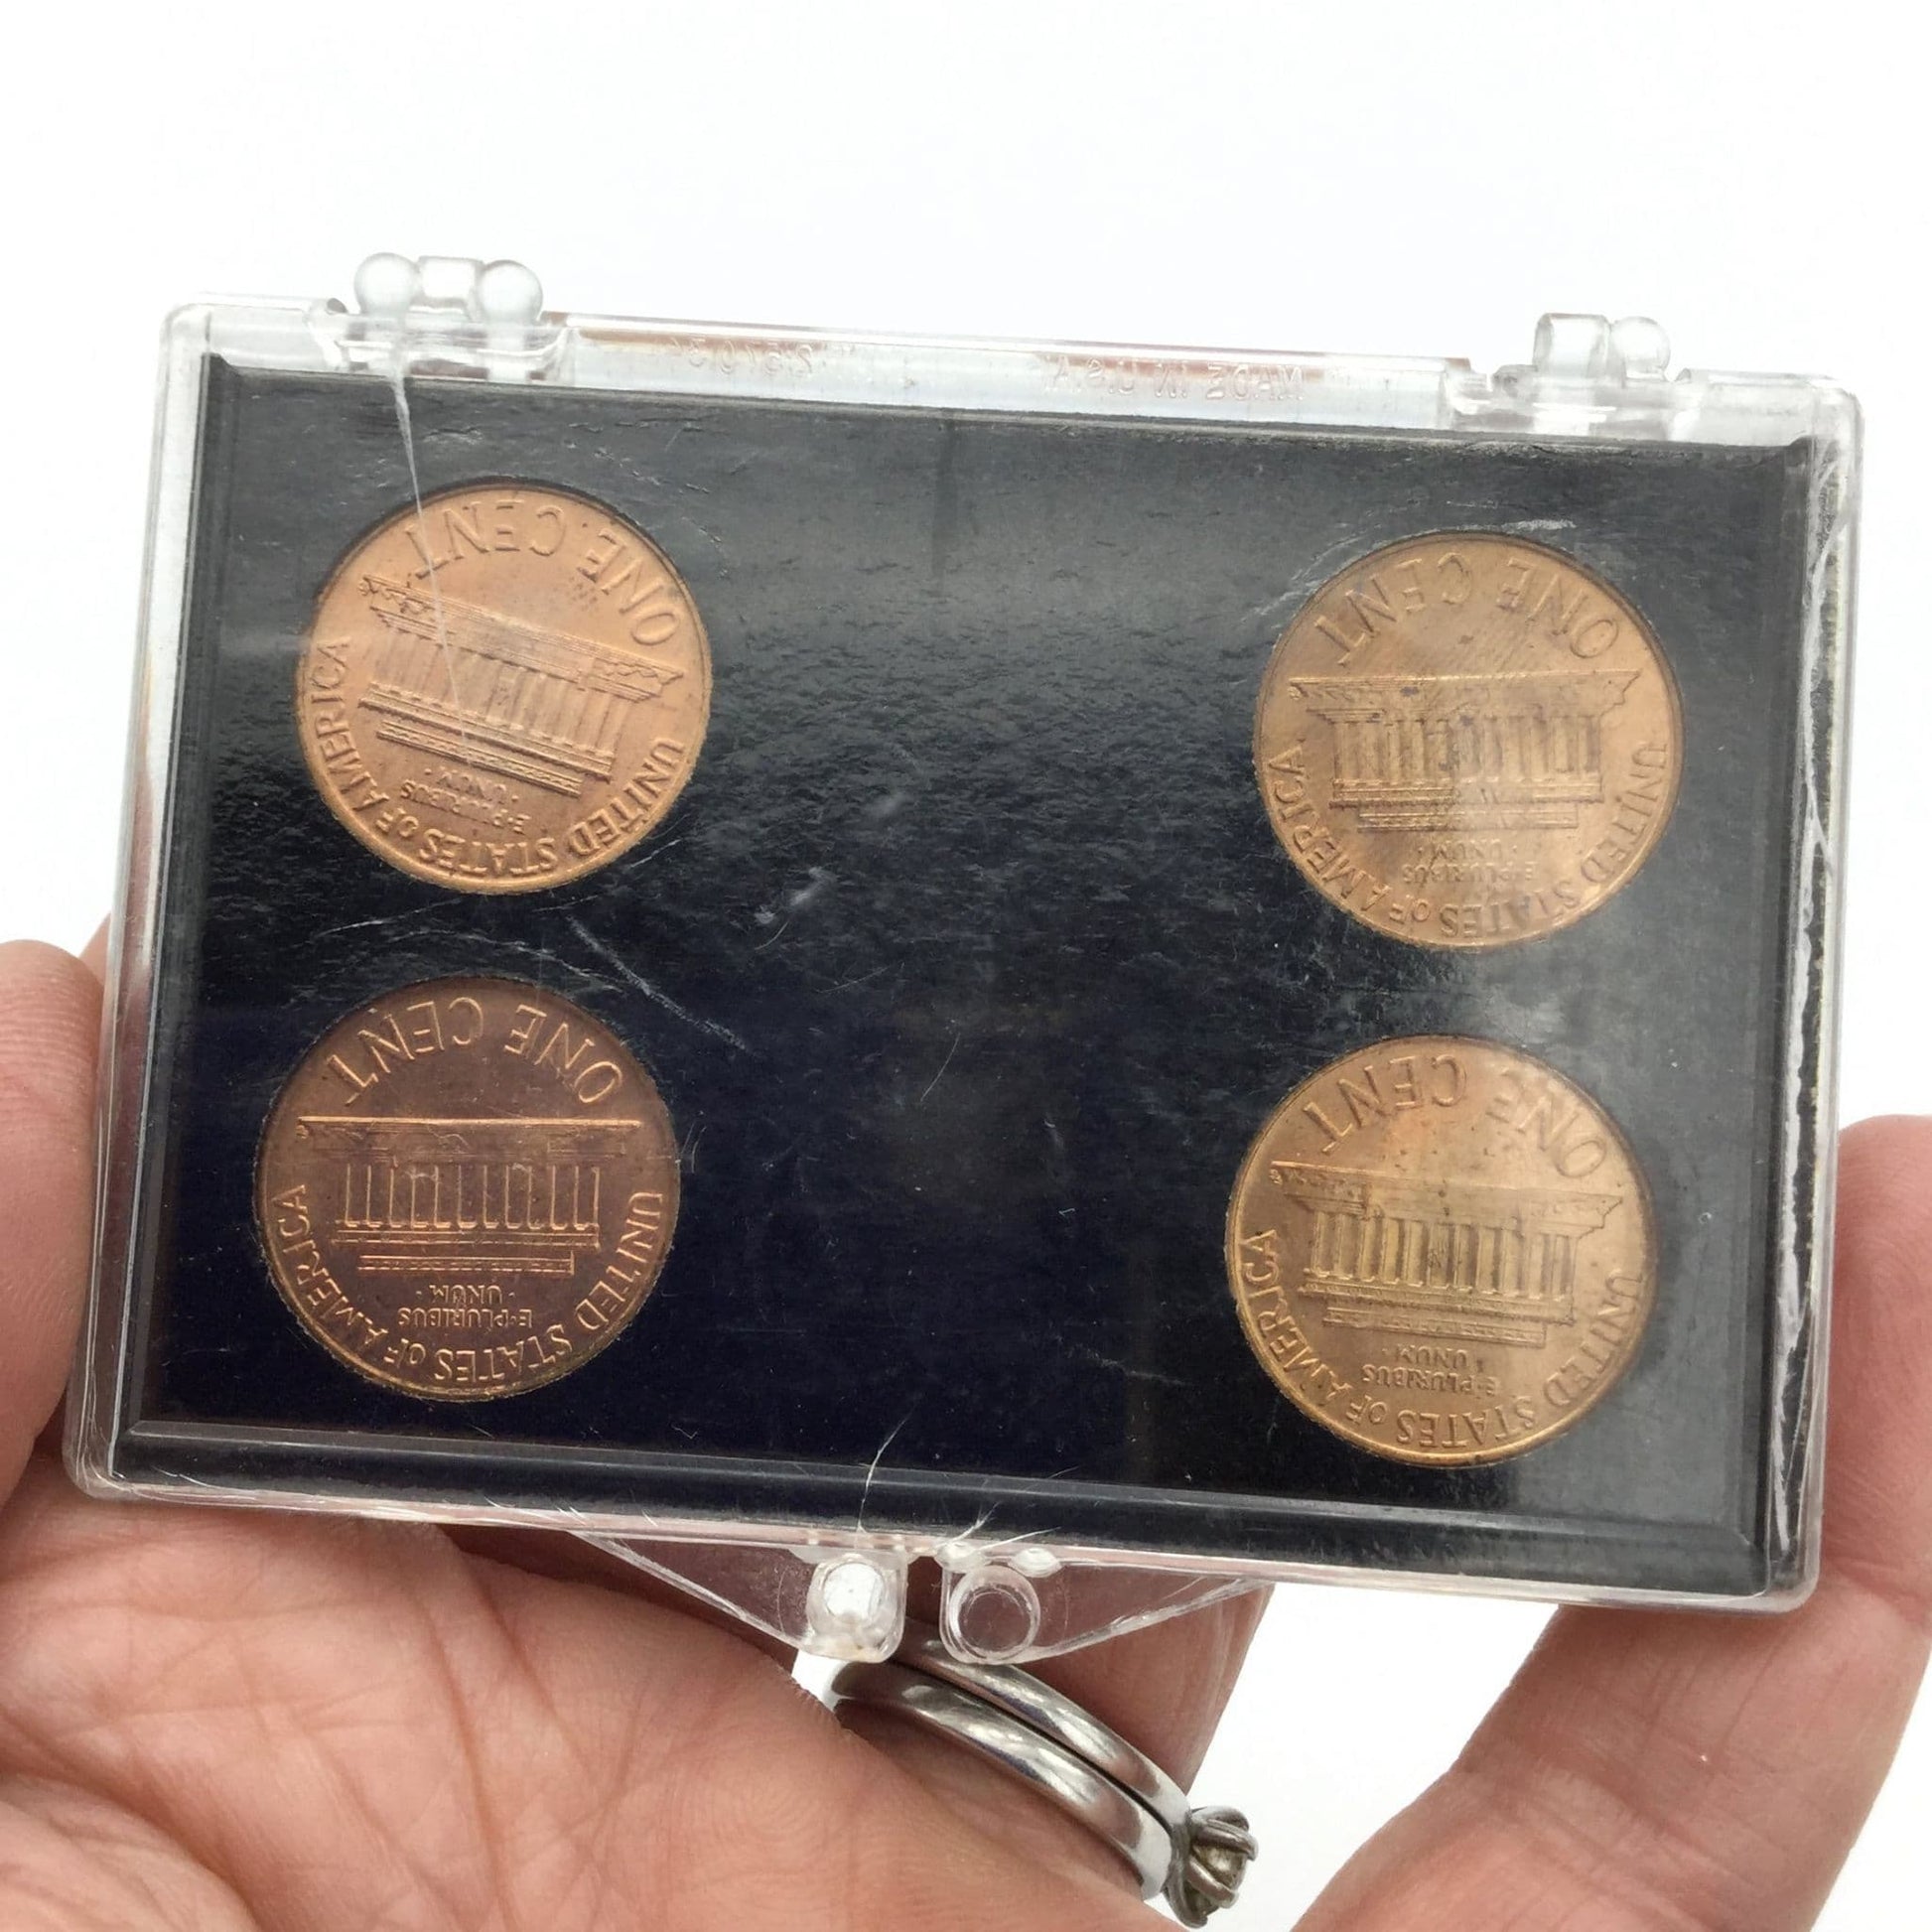 Reverse side of Four Lincoln Memorial Cents in a black holder and perspex case. It has P and D on the blakc holder and 1960 small date and 1960 large date on the black holder held in a hand